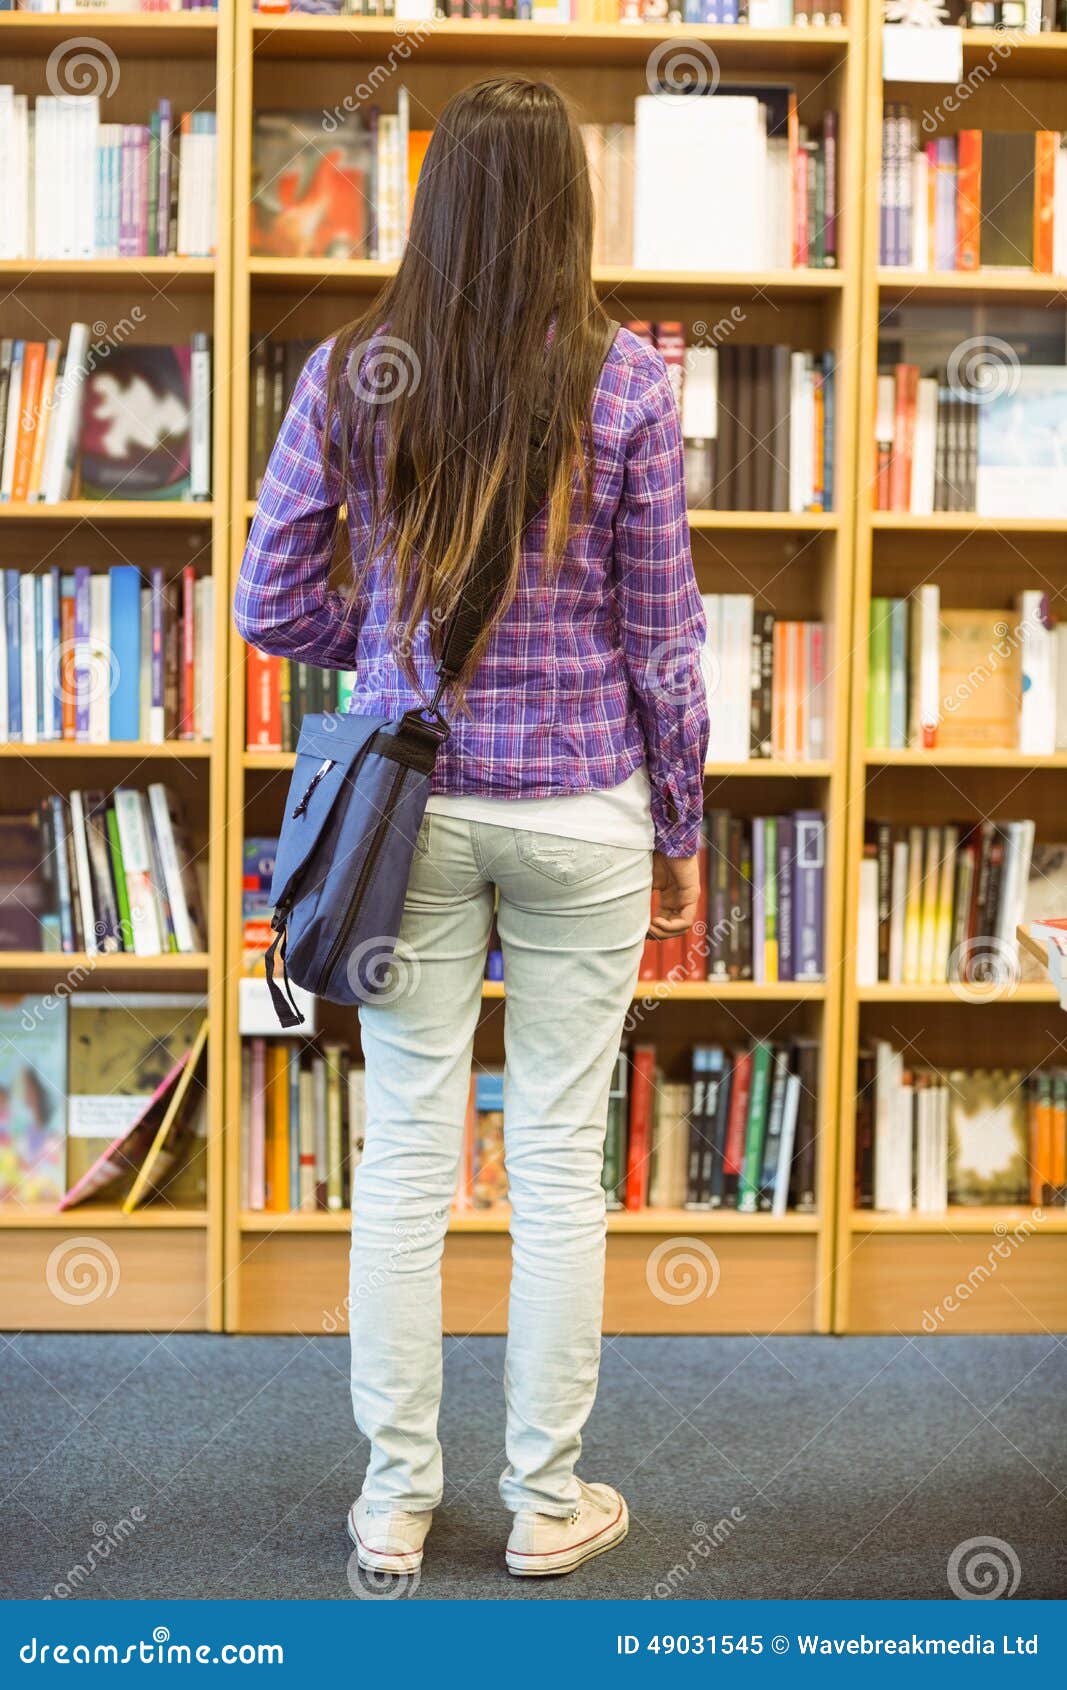 university student standing in the bookcase